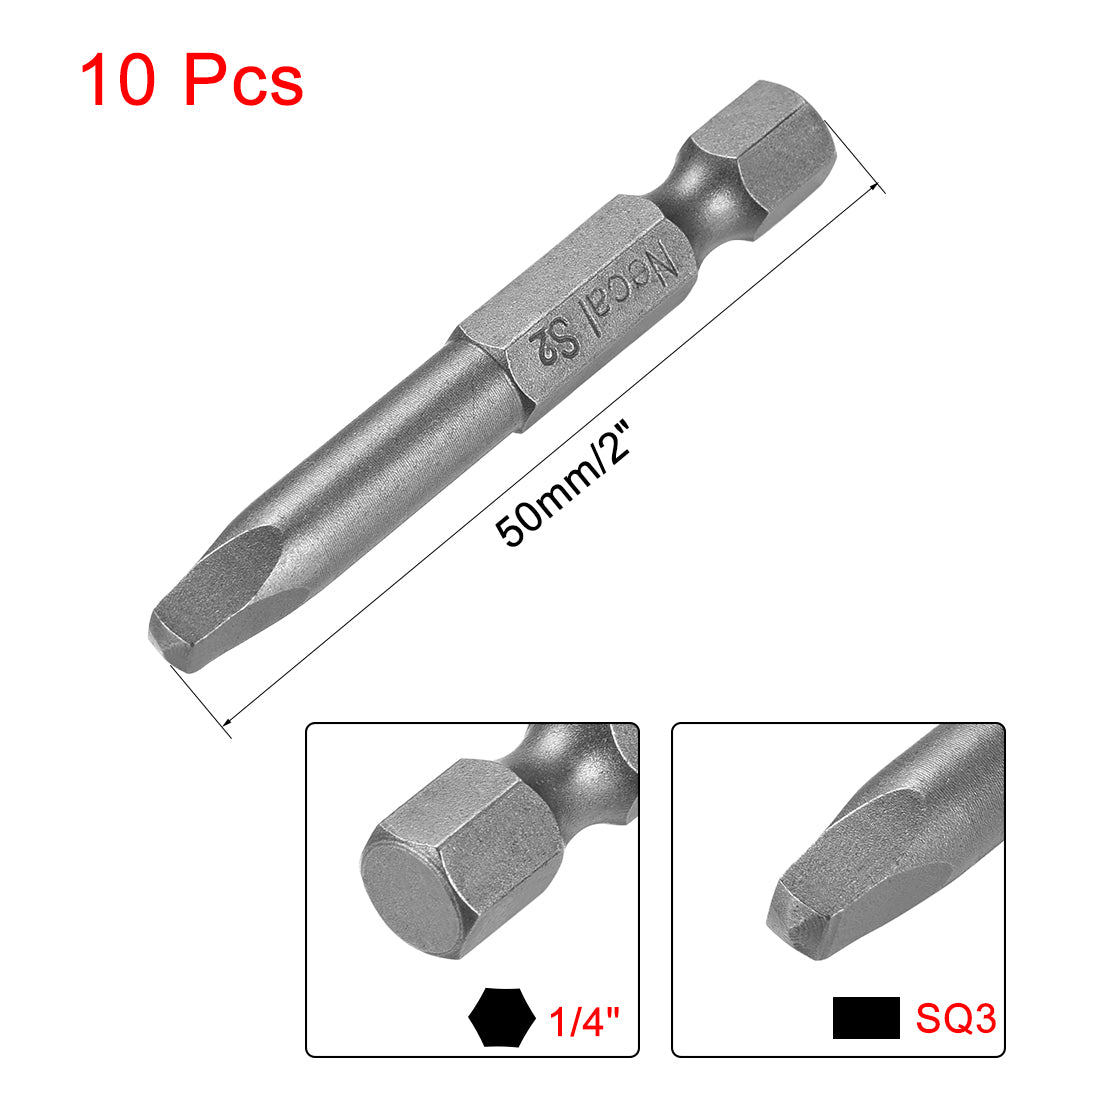 uxcell Uxcell 1/4-Inch Hex Shank 50mm Length Square Head SQ3 Magnetic Screw Driver S2 Screwdriver Bits 10pcs